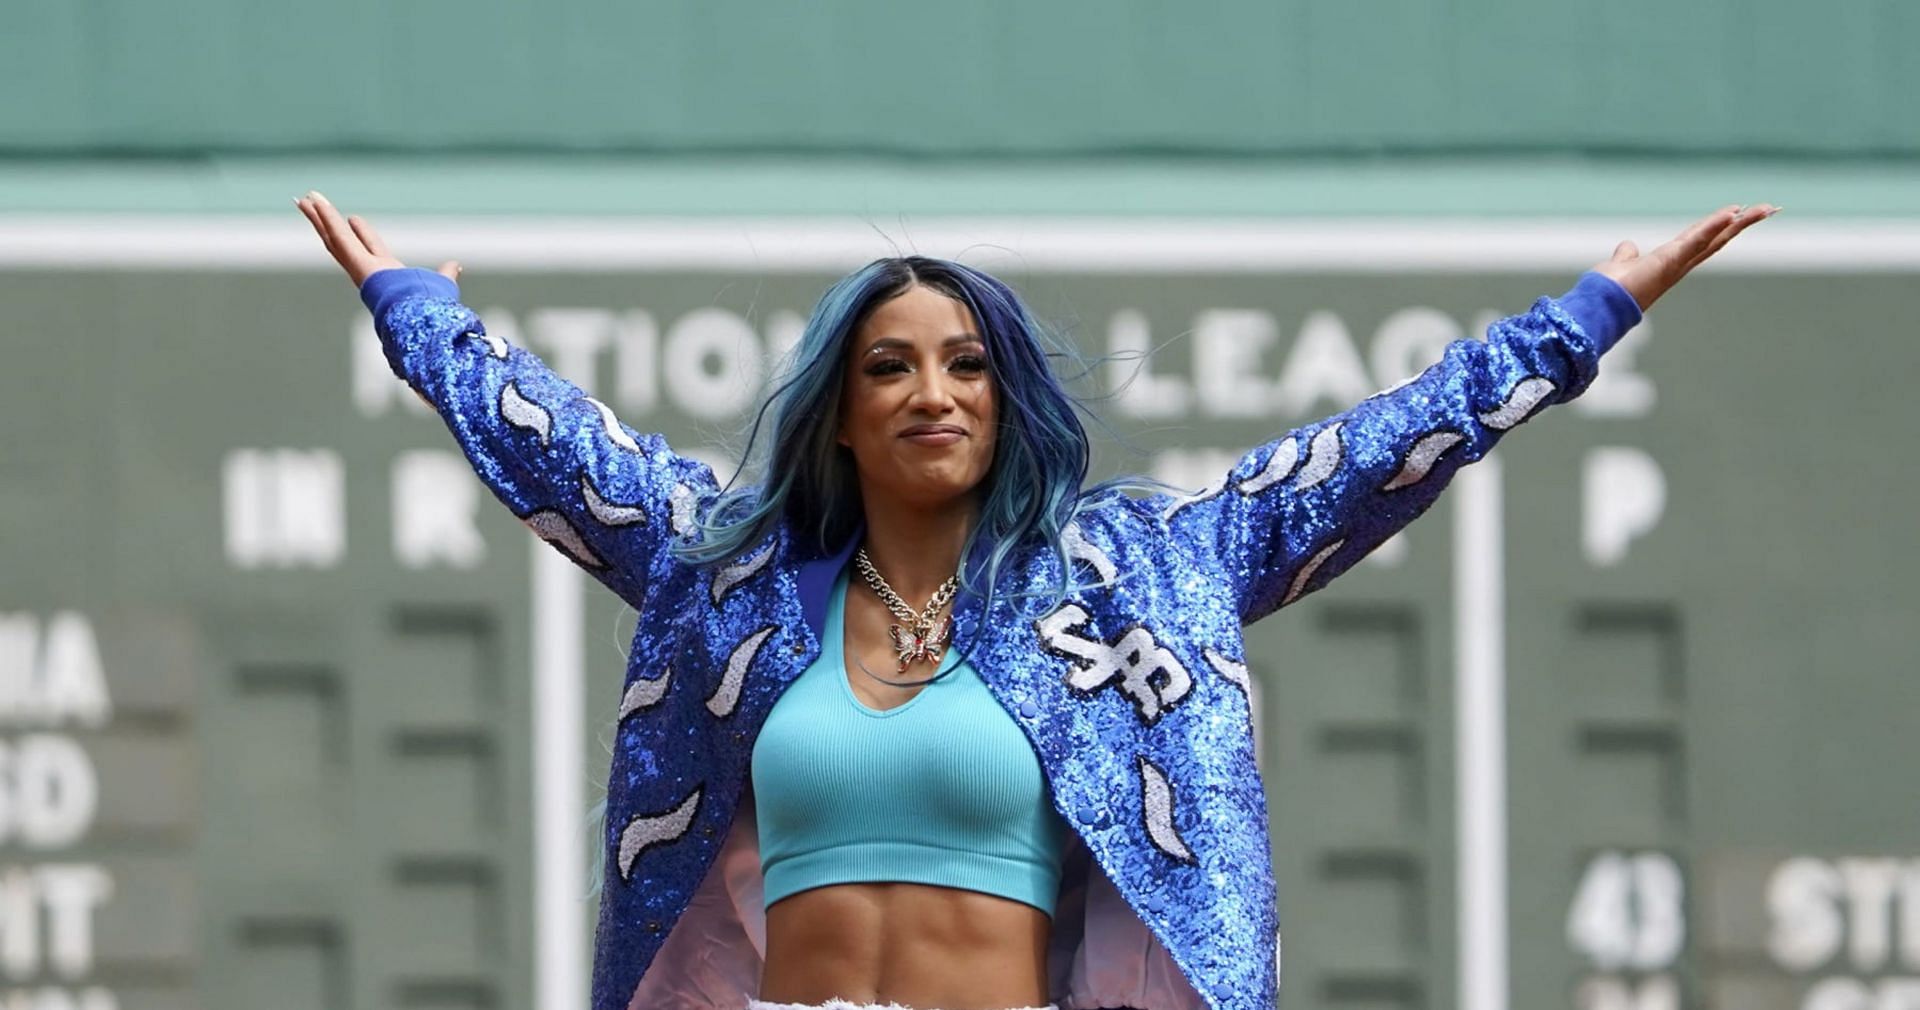 Sasha Banks can get paid more in WWE